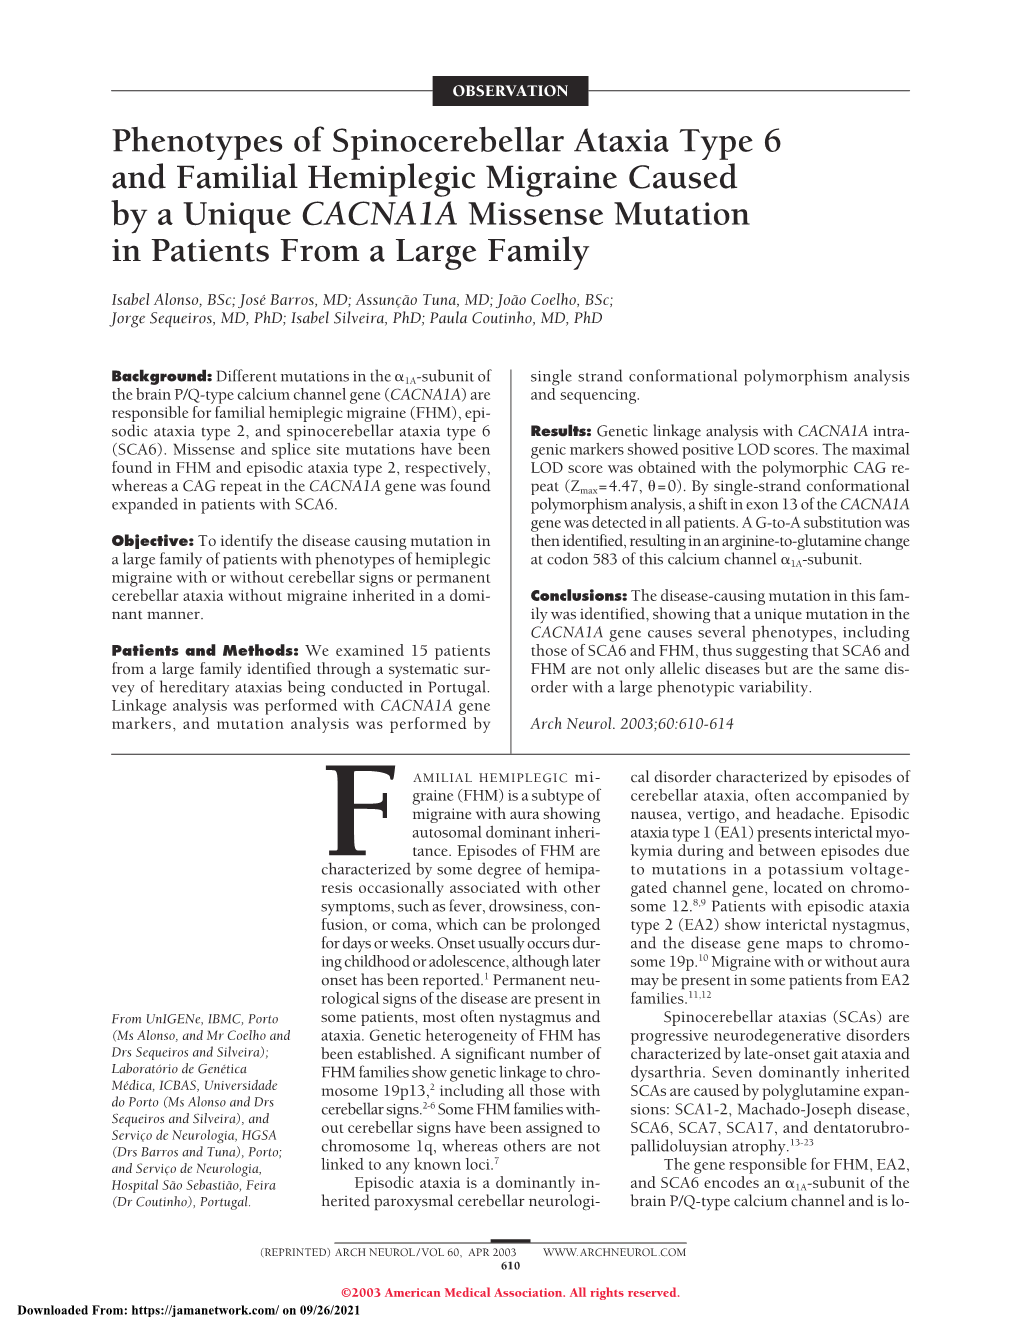 Phenotypes of Spinocerebellar Ataxia Type 6 and Familial Hemiplegic Migraine Caused by a Unique CACNA1A Missense Mutation in Patients from a Large Family